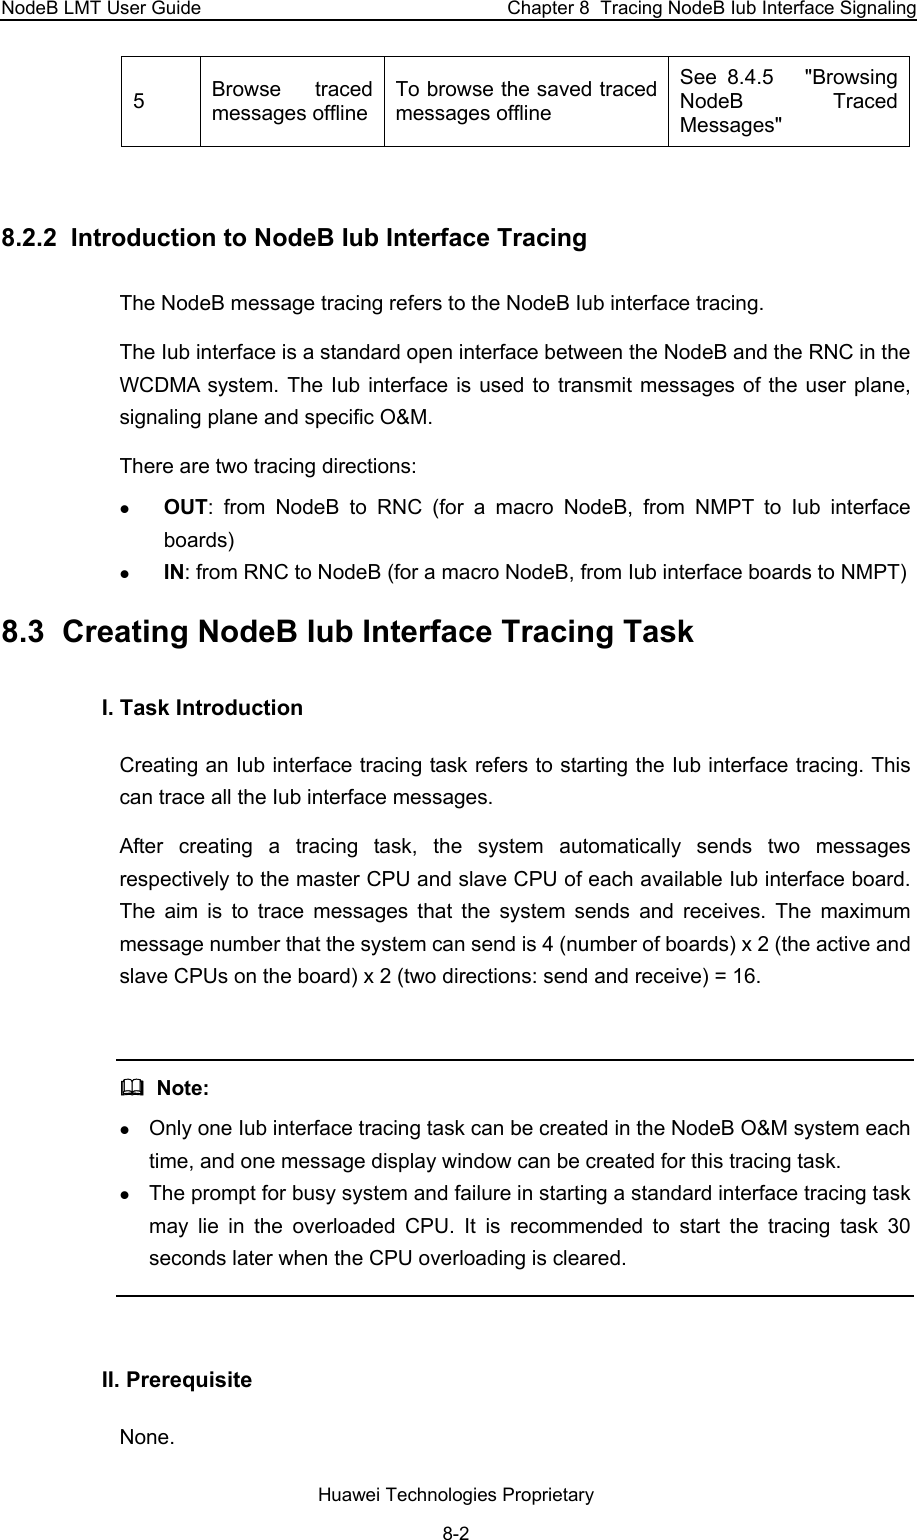 NodeB LMT User Guide  Chapter 8  Tracing NodeB Iub Interface Signaling 5  Browse traced messages offlineTo browse the saved traced messages offline See  8.4.5   &quot;Browsing NodeB Traced Messages&quot;  8.2.2  Introduction to NodeB Iub Interface Tracing The NodeB message tracing refers to the NodeB Iub interface tracing.  The Iub interface is a standard open interface between the NodeB and the RNC in the WCDMA system. The Iub interface is used to transmit messages of the user plane, signaling plane and specific O&amp;M. There are two tracing directions: z OUT: from NodeB to RNC (for a macro NodeB, from NMPT to Iub interface boards) z IN: from RNC to NodeB (for a macro NodeB, from Iub interface boards to NMPT) 8.3  Creating NodeB Iub Interface Tracing Task I. Task Introduction Creating an Iub interface tracing task refers to starting the Iub interface tracing. This can trace all the Iub interface messages. After creating a tracing task, the system automatically sends two messages respectively to the master CPU and slave CPU of each available Iub interface board. The aim is to trace messages that the system sends and receives. The maximum message number that the system can send is 4 (number of boards) x 2 (the active and slave CPUs on the board) x 2 (two directions: send and receive) = 16.    Note: z Only one Iub interface tracing task can be created in the NodeB O&amp;M system each time, and one message display window can be created for this tracing task. z The prompt for busy system and failure in starting a standard interface tracing task may lie in the overloaded CPU. It is recommended to start the tracing task 30 seconds later when the CPU overloading is cleared.   II. Prerequisite None.  Huawei Technologies Proprietary 8-2 